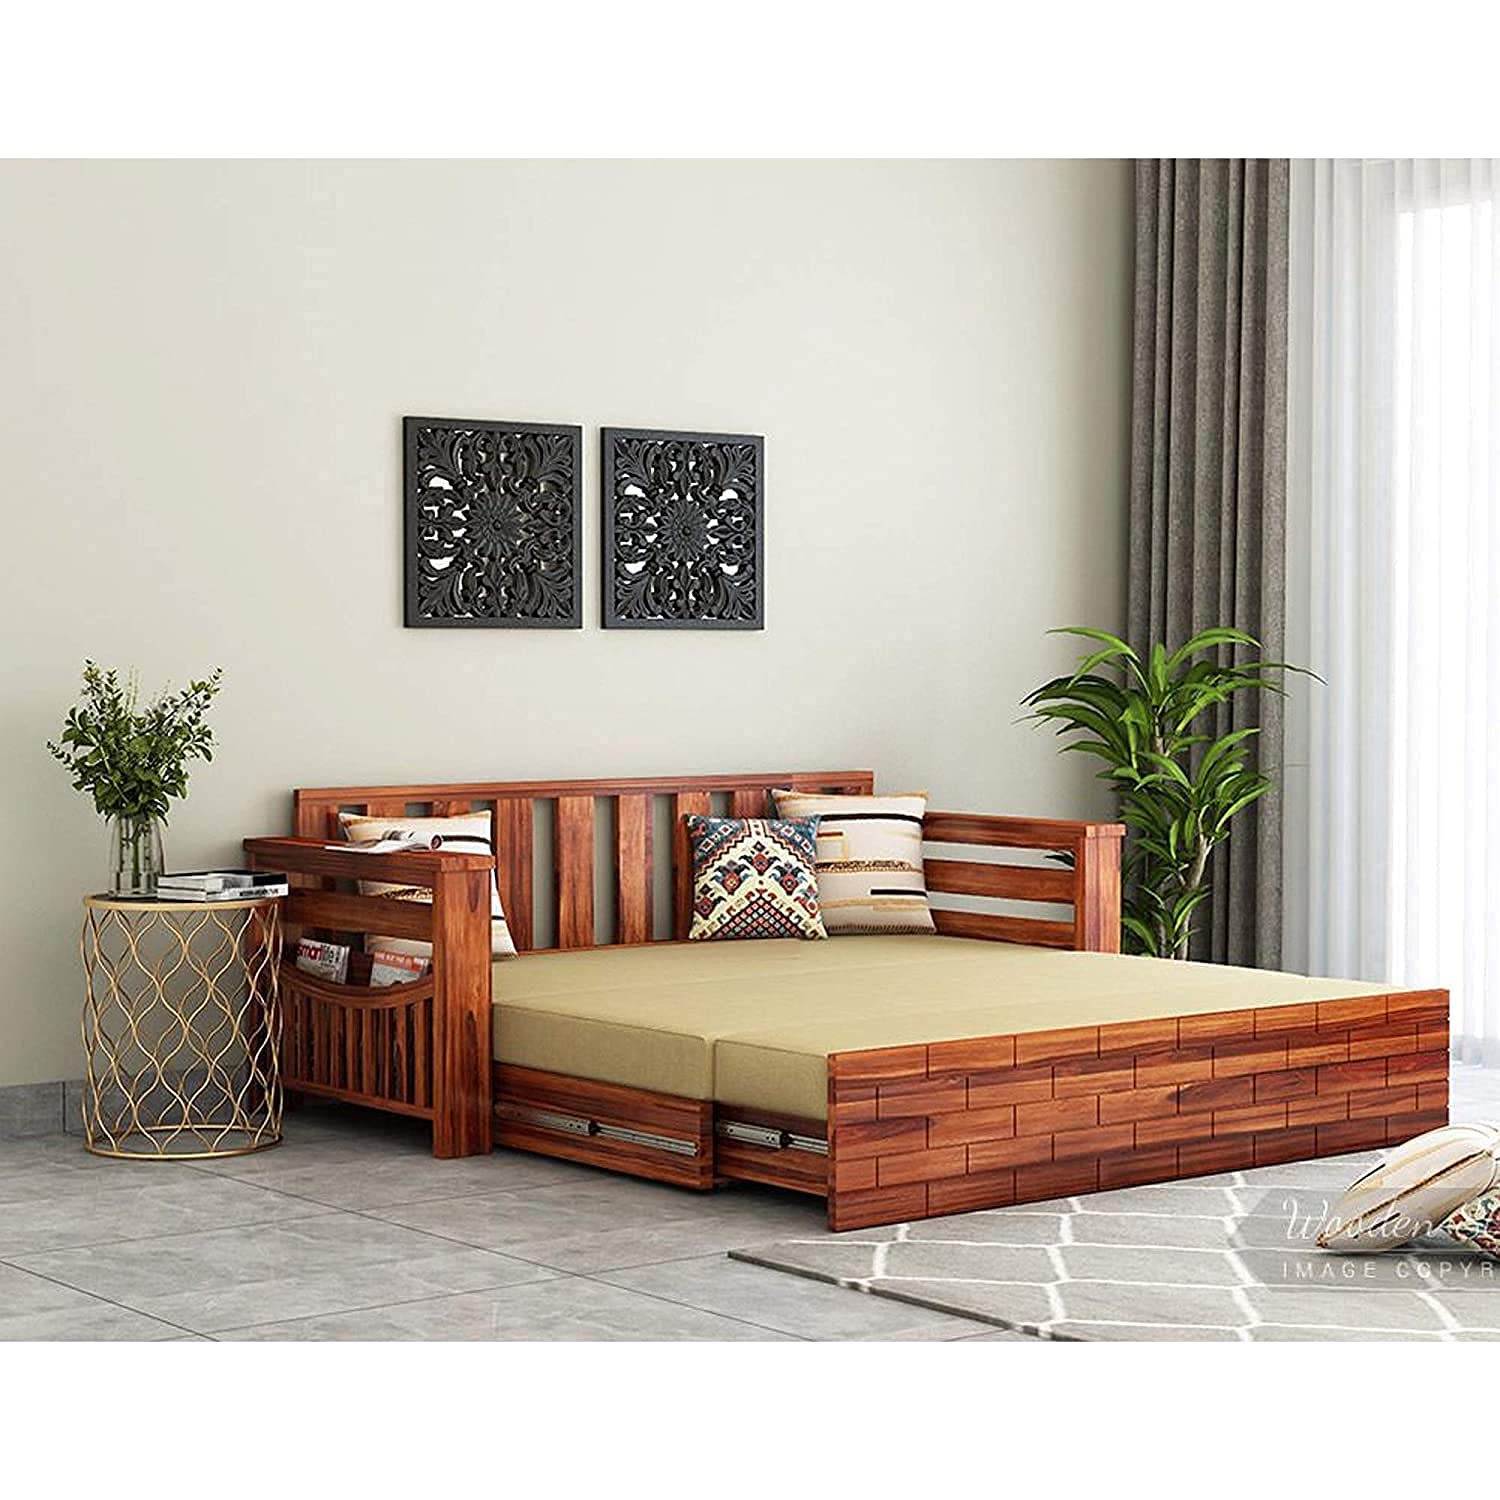 Wooden Sofa S Bed